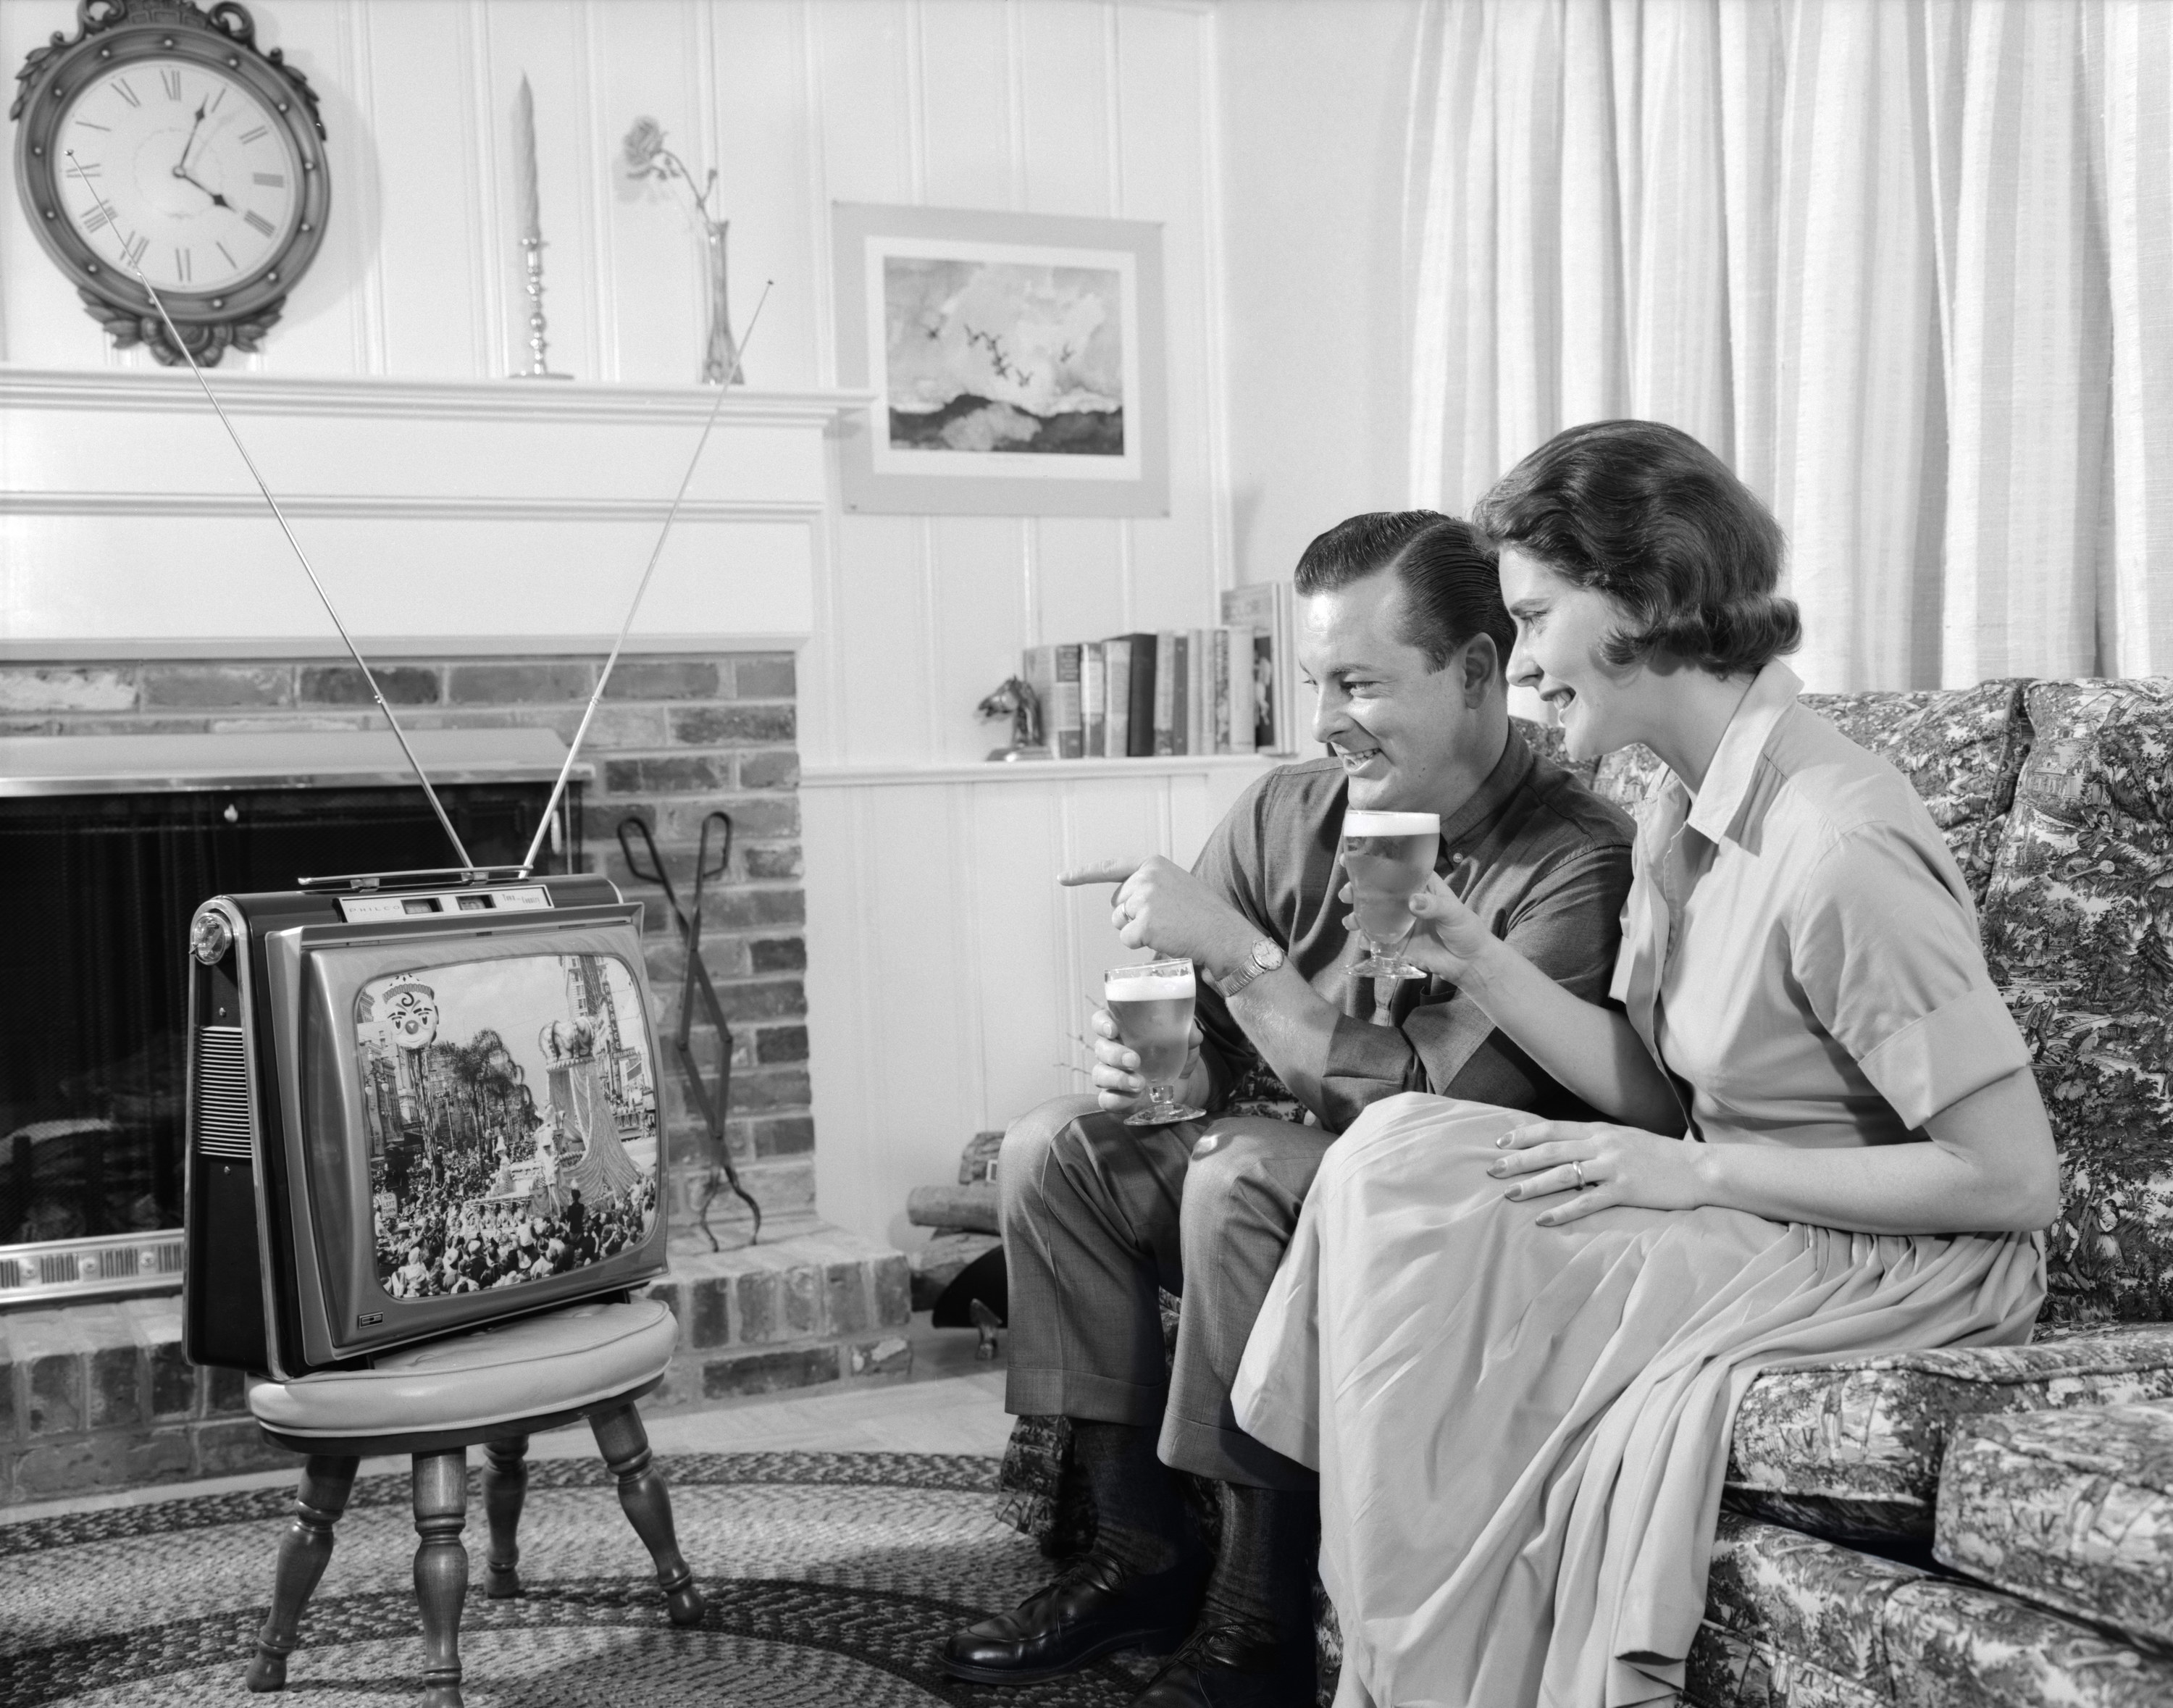 Black-and-white photo of a man and a woman sitting on a couch and looking at a small black-and-white TV on a stool